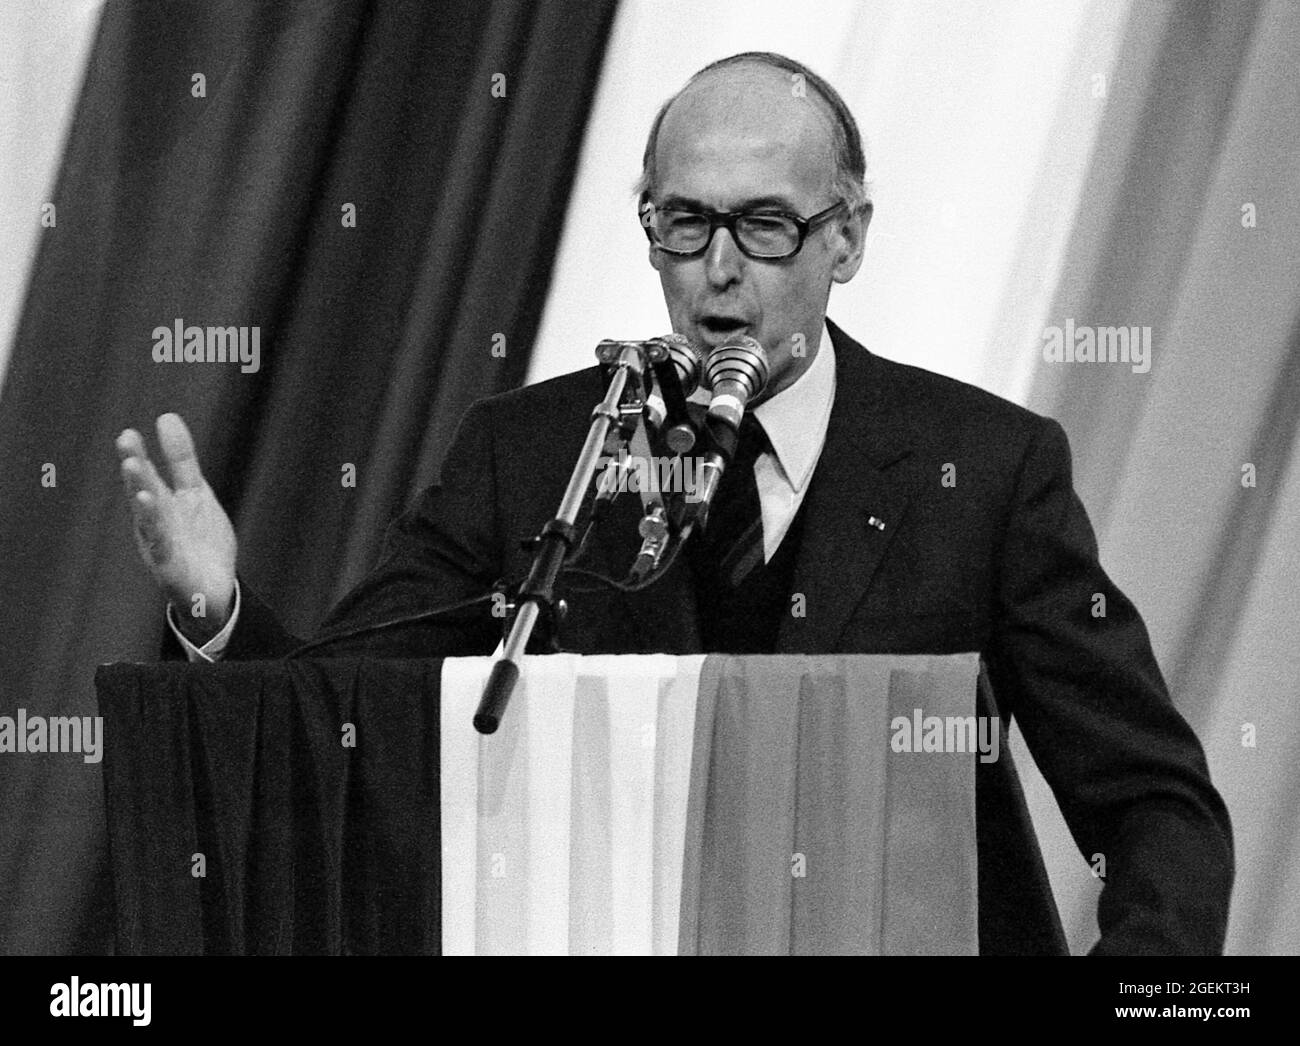 AJAXNETPHOTO. 3RD MAY, 1981. PARIS, FRANCE. - PRESIDENTIAL HOPEFUL - VALÉRY GISCARD D'ESTAING GIVES SPEACH TO SUPPORTERS AT A RALLY HE ATTENDED.PHOTO:JONATHAN EASTLAND/AJAX REF:810305 16 Stock Photo